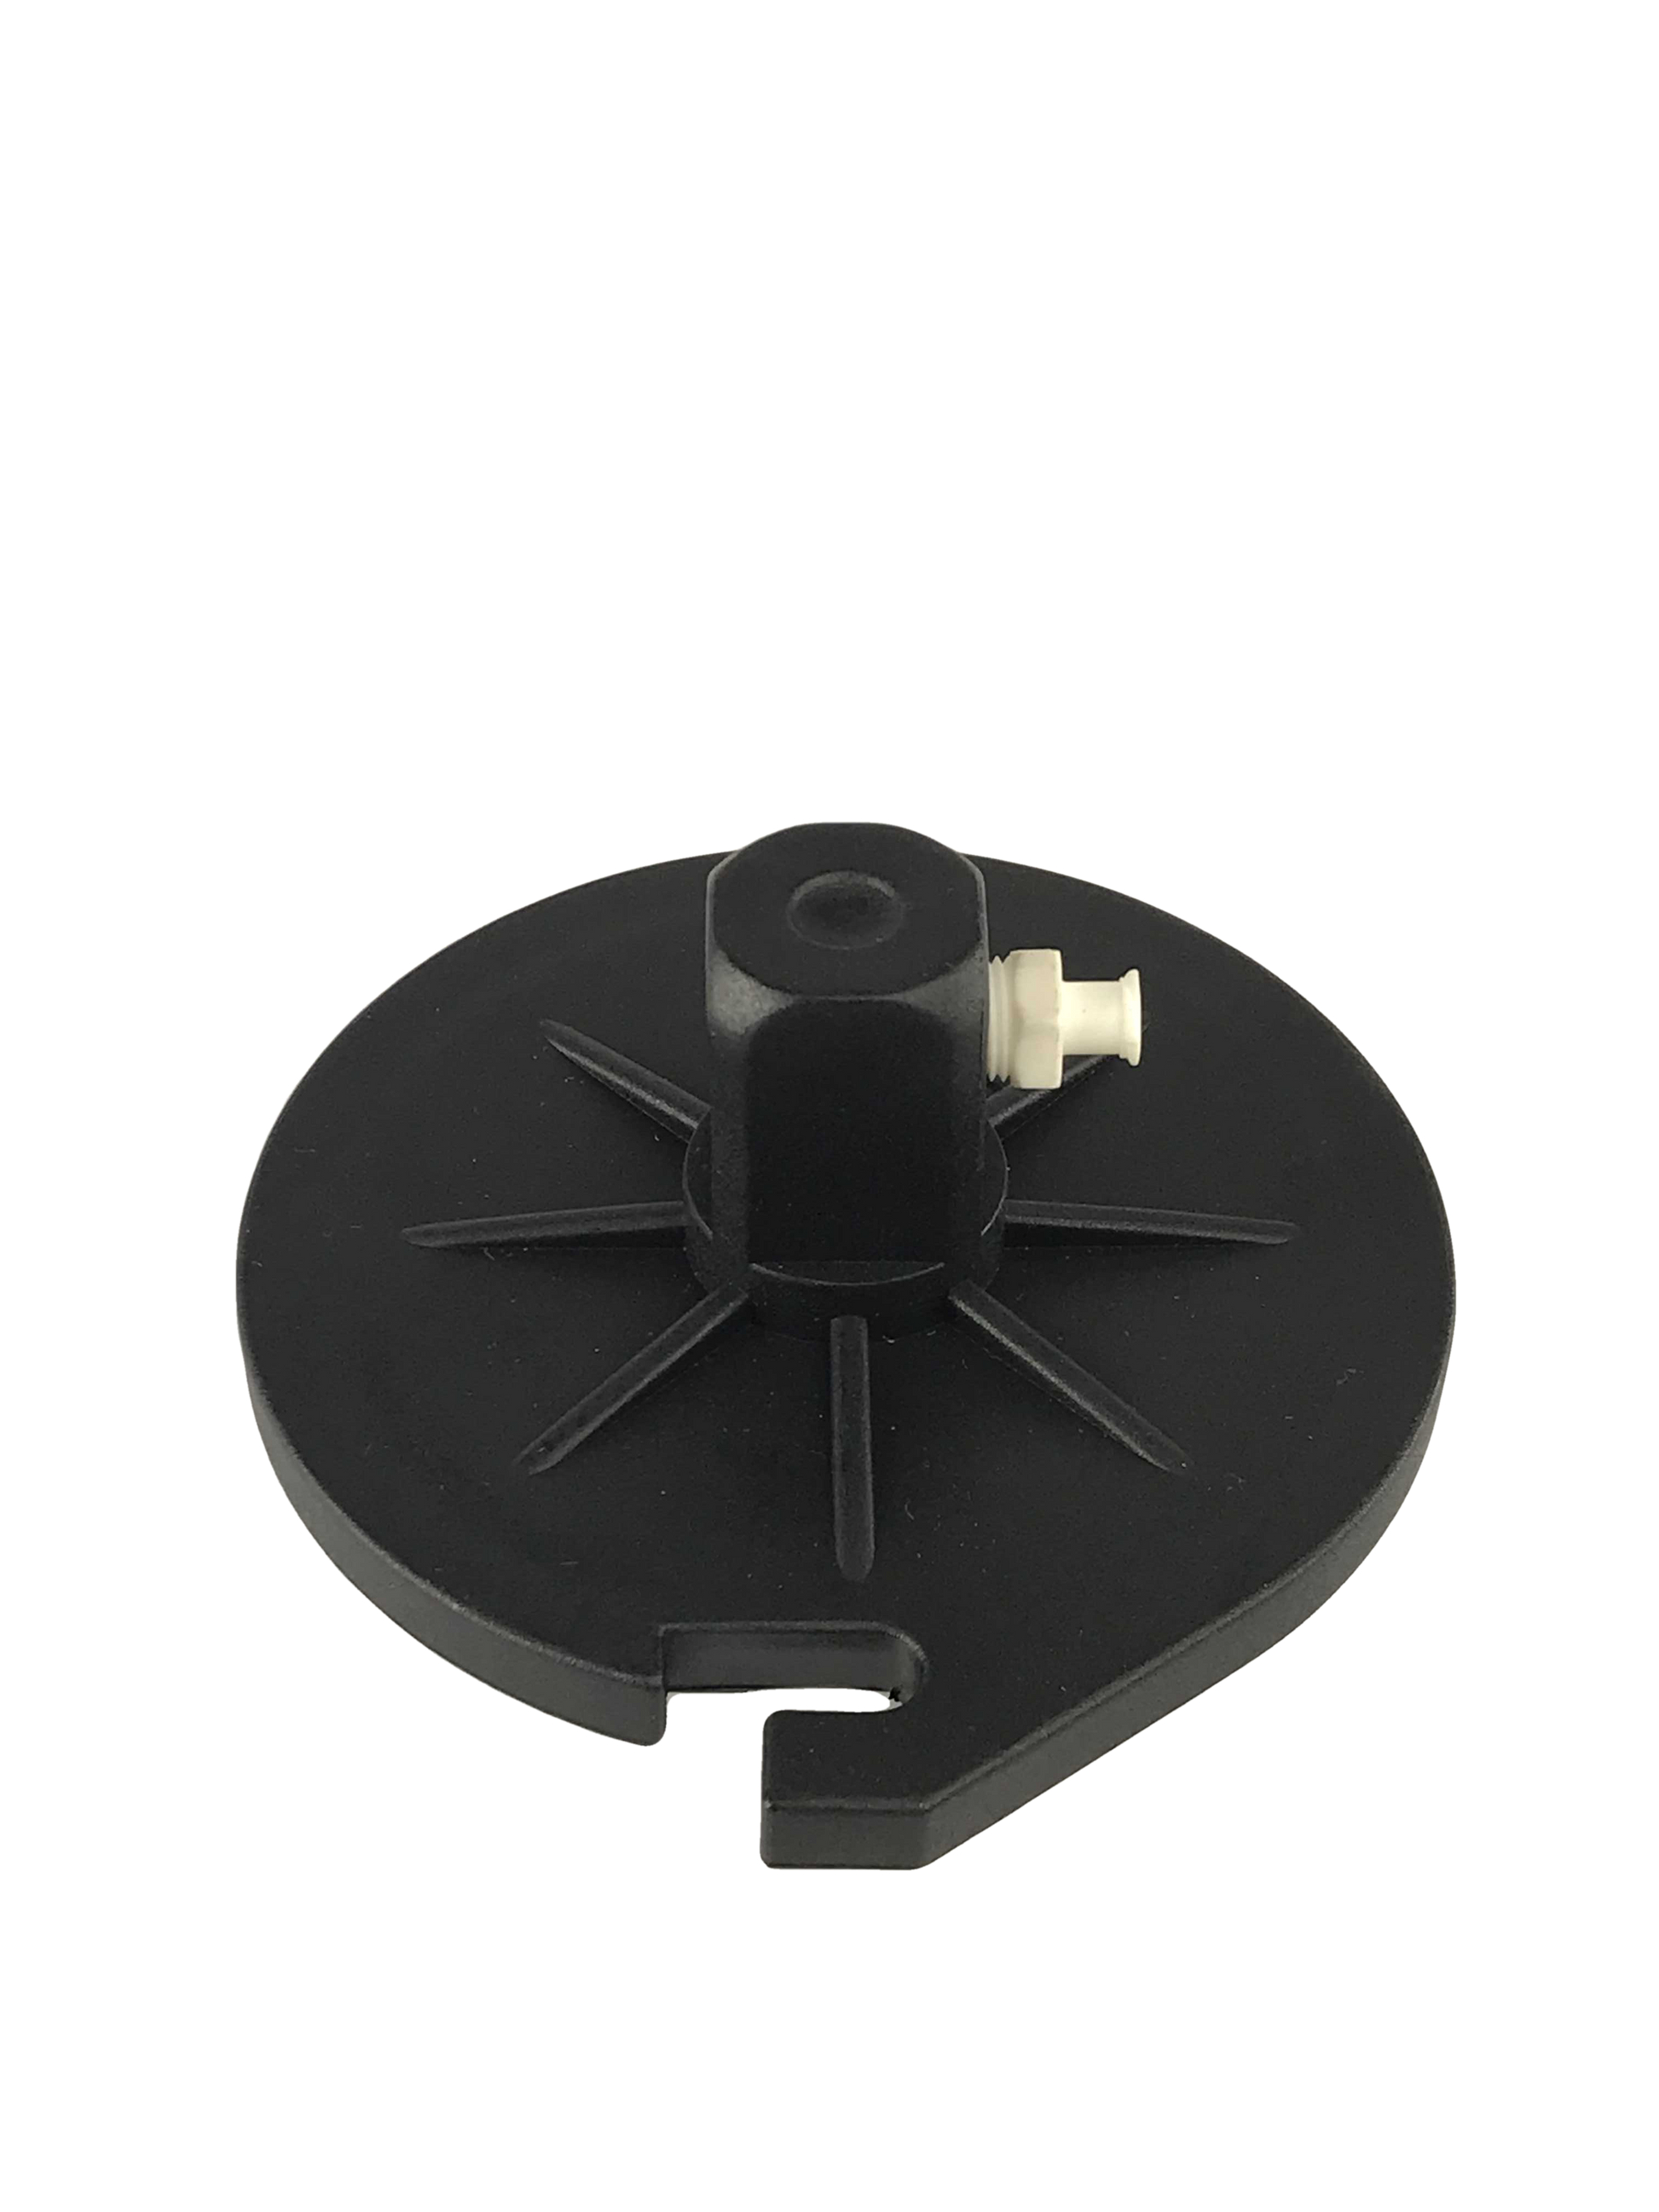 a black and white BC-0813 Master Cylinder Cap Adapter. It is a tool that is used to convert a standard cylinder cap to a master cylinder cap, most likely used in car repair. The adapter is made of a durable plastic